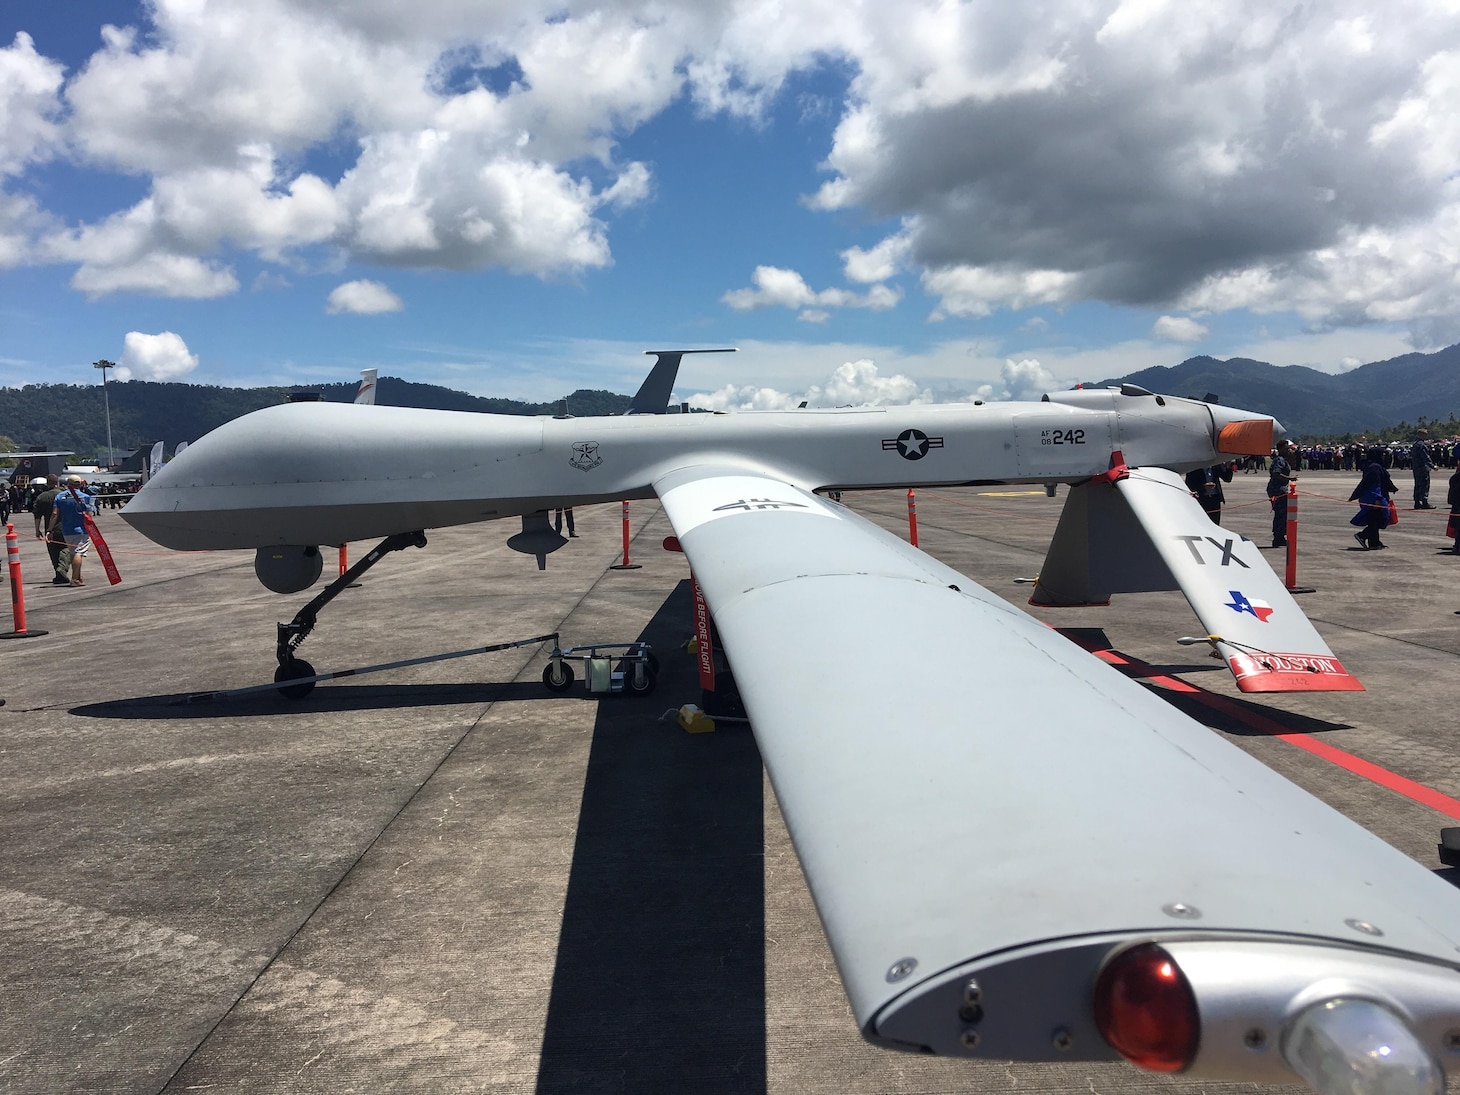 A U.S. Air Force MQ-1B Predator remote piloted aircraft with the 147th Air Reconnaissance Wing of the Texas Air National Guard is on display at the Langkawi International Maritime and Aerospace Expedition (LIMA) 2017, in Sirat, Malaysia, March 21, 2017. Events such as LIMA contribute to increased interoperability and security throughout the Indo-Asia-Pacific region. LIMA presents an opportunity for participants to focus on strengthening military-to-military ties. (U.S. Air Force photo by Capt Jessica Clark)